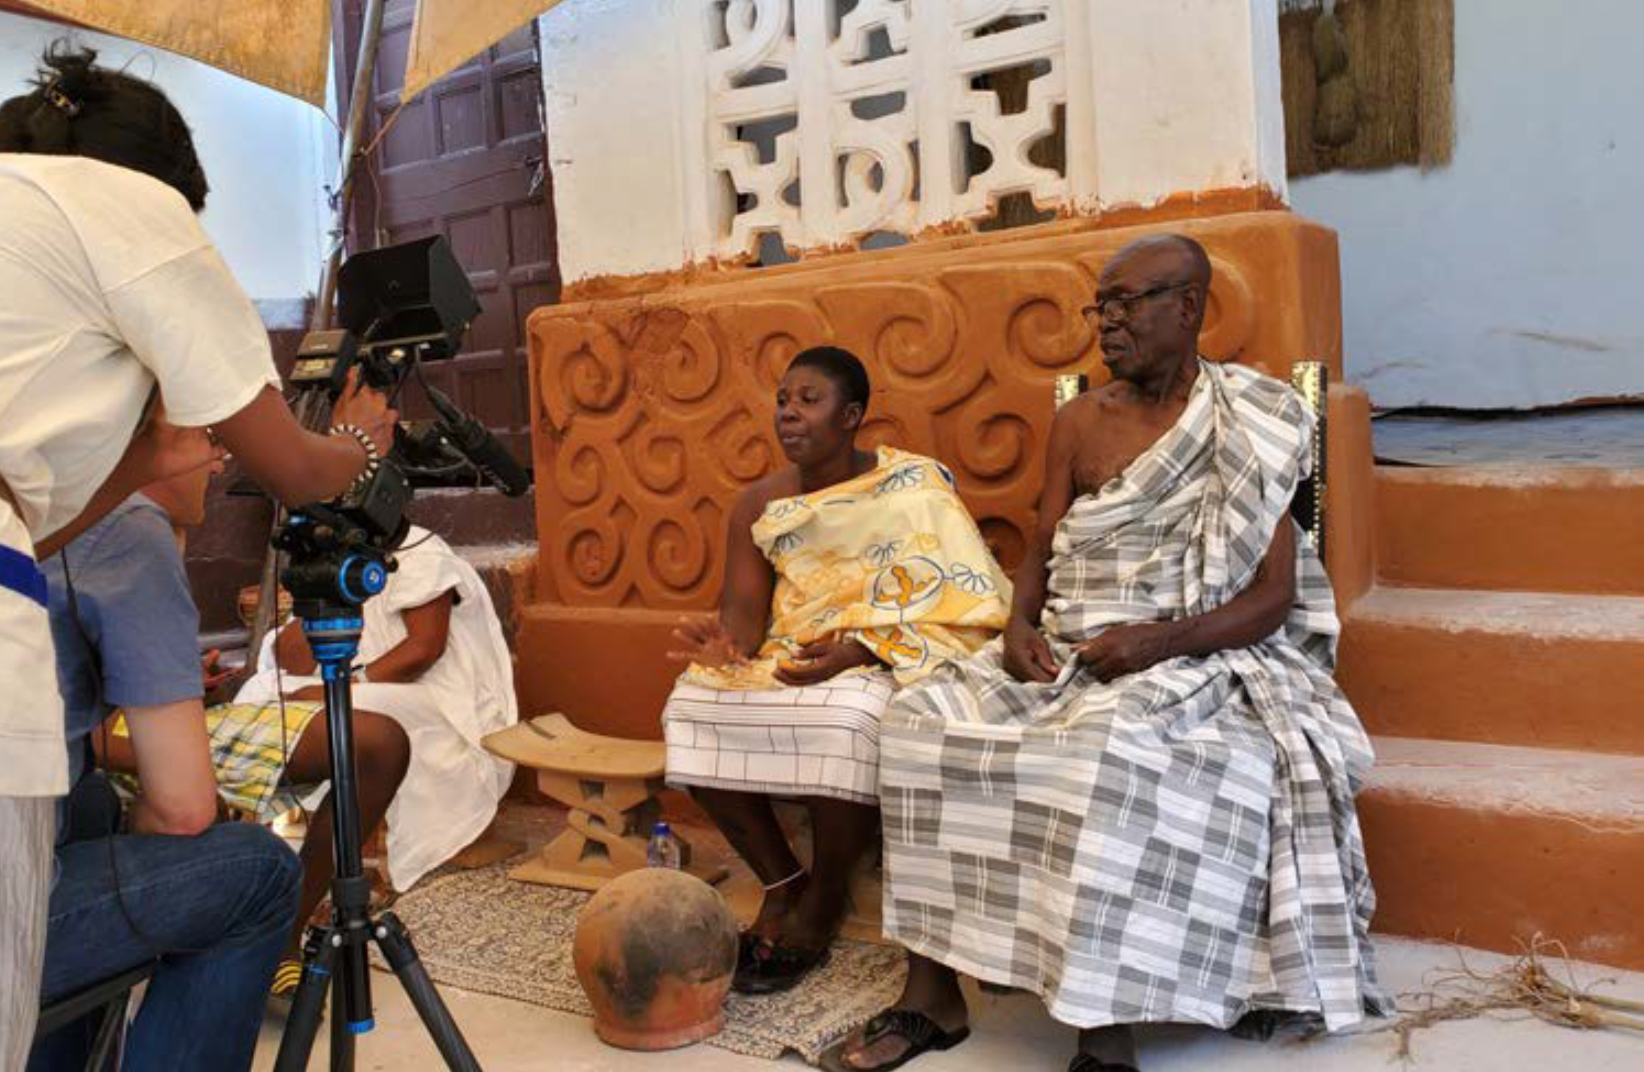 A woman and a man in traditional Ghanaian dress are seated on wooden stools and speak into a camera